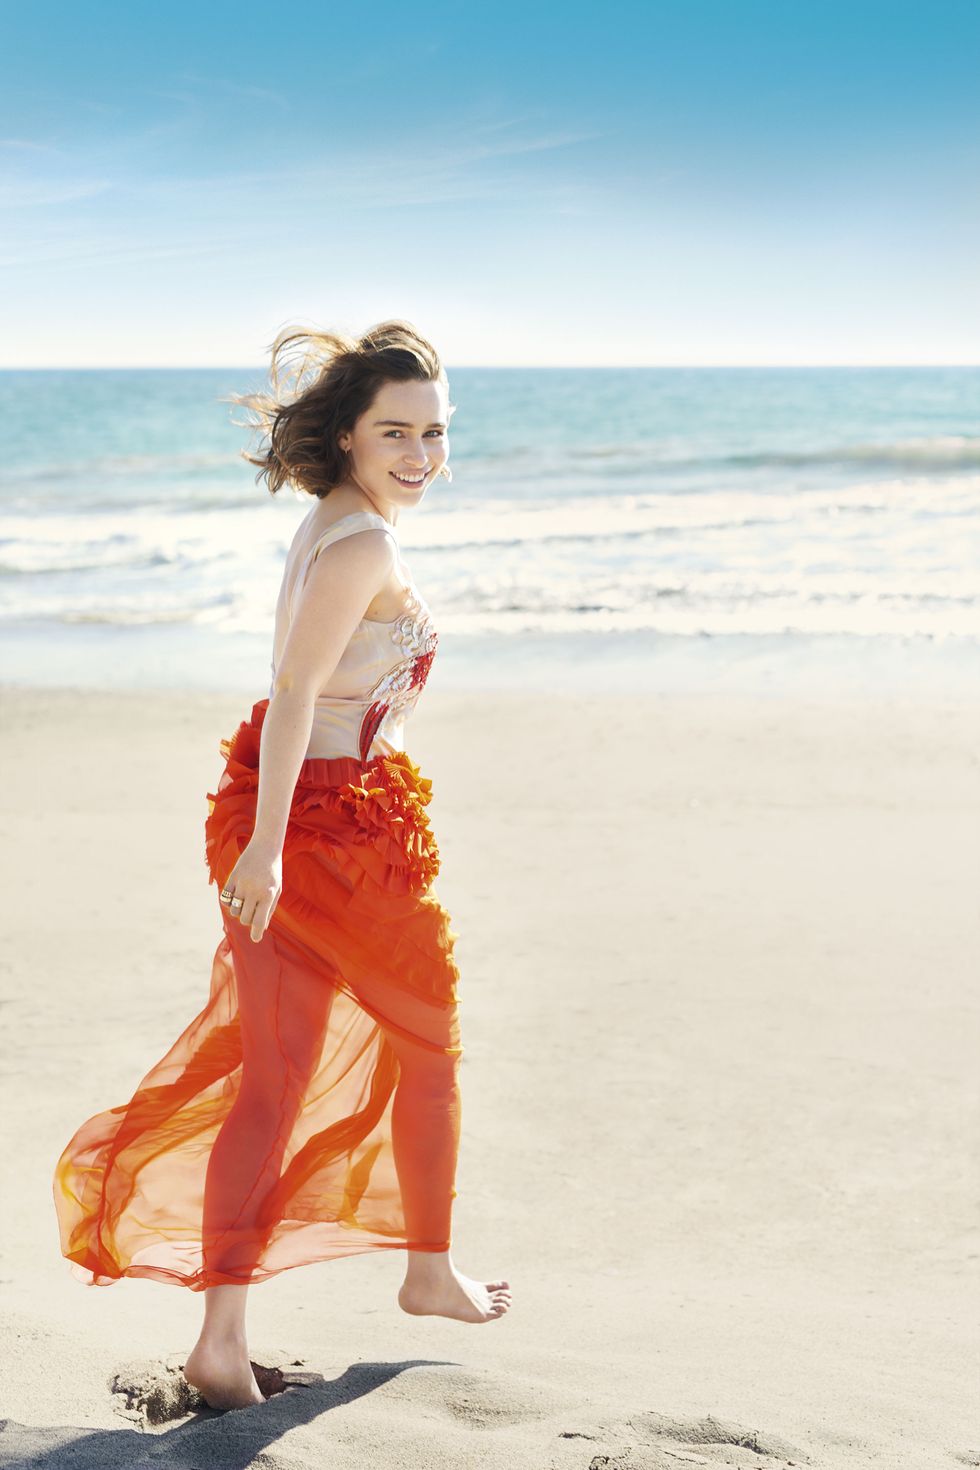 Behind the scenes with Emilia Clarke on her July issue Harper's Bazaar cover shoot